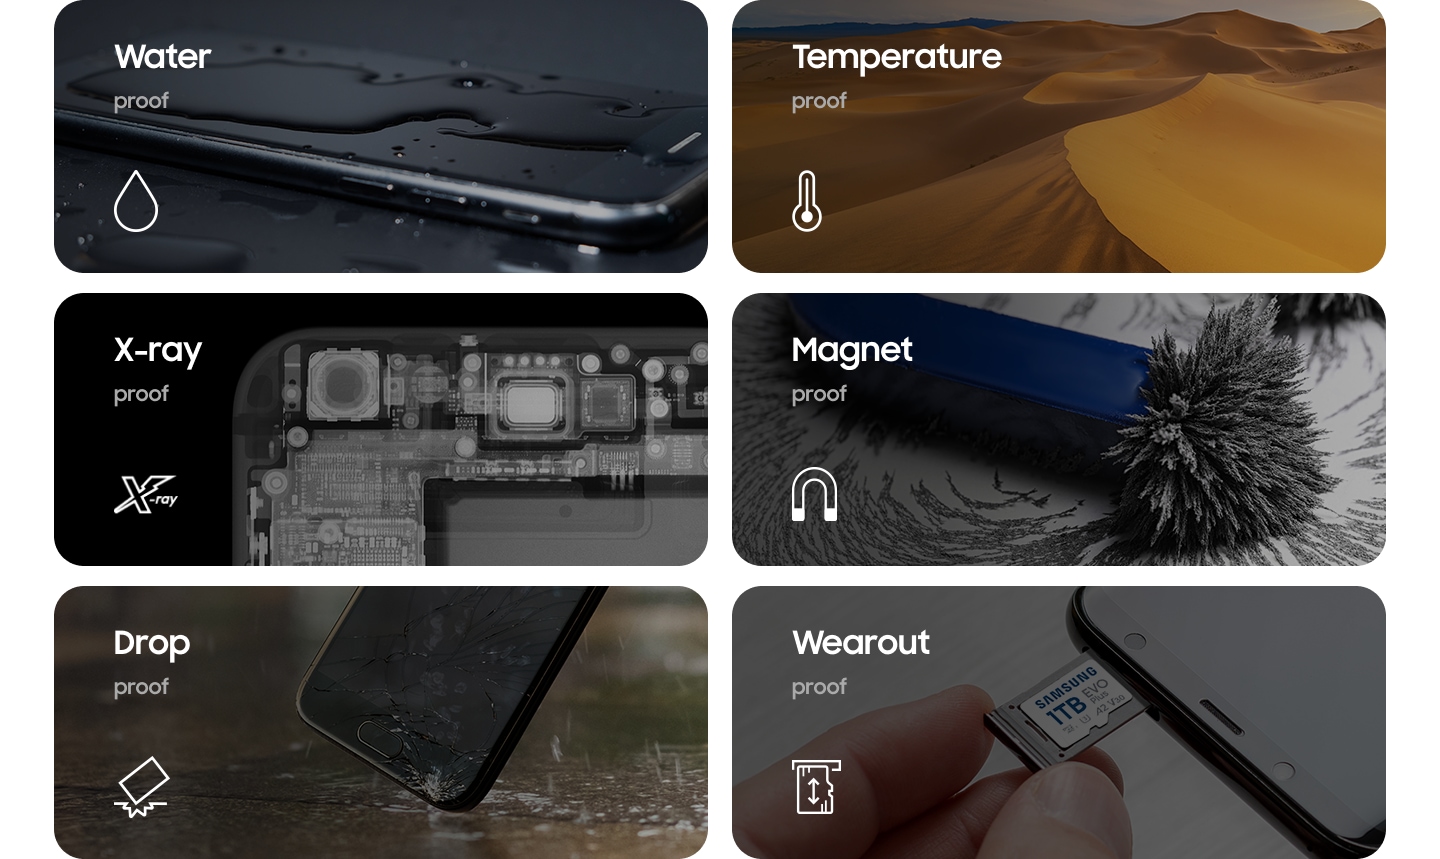 Six Proof functions are introduced. The first one says "Water proof" and shows a smartphone with water on it. The second says "Temperature proof" and shows a desert. The third one says "X-ray proof" and shows a perspective view of the smartphone. The fourth one says "Magnet proof" and shows a magnet. The fifth one says "Drop proof" and shows a smartphone falling to the floor. The sixth one says "Wearout proof" and shows a microSD card inserted into the smartphone.